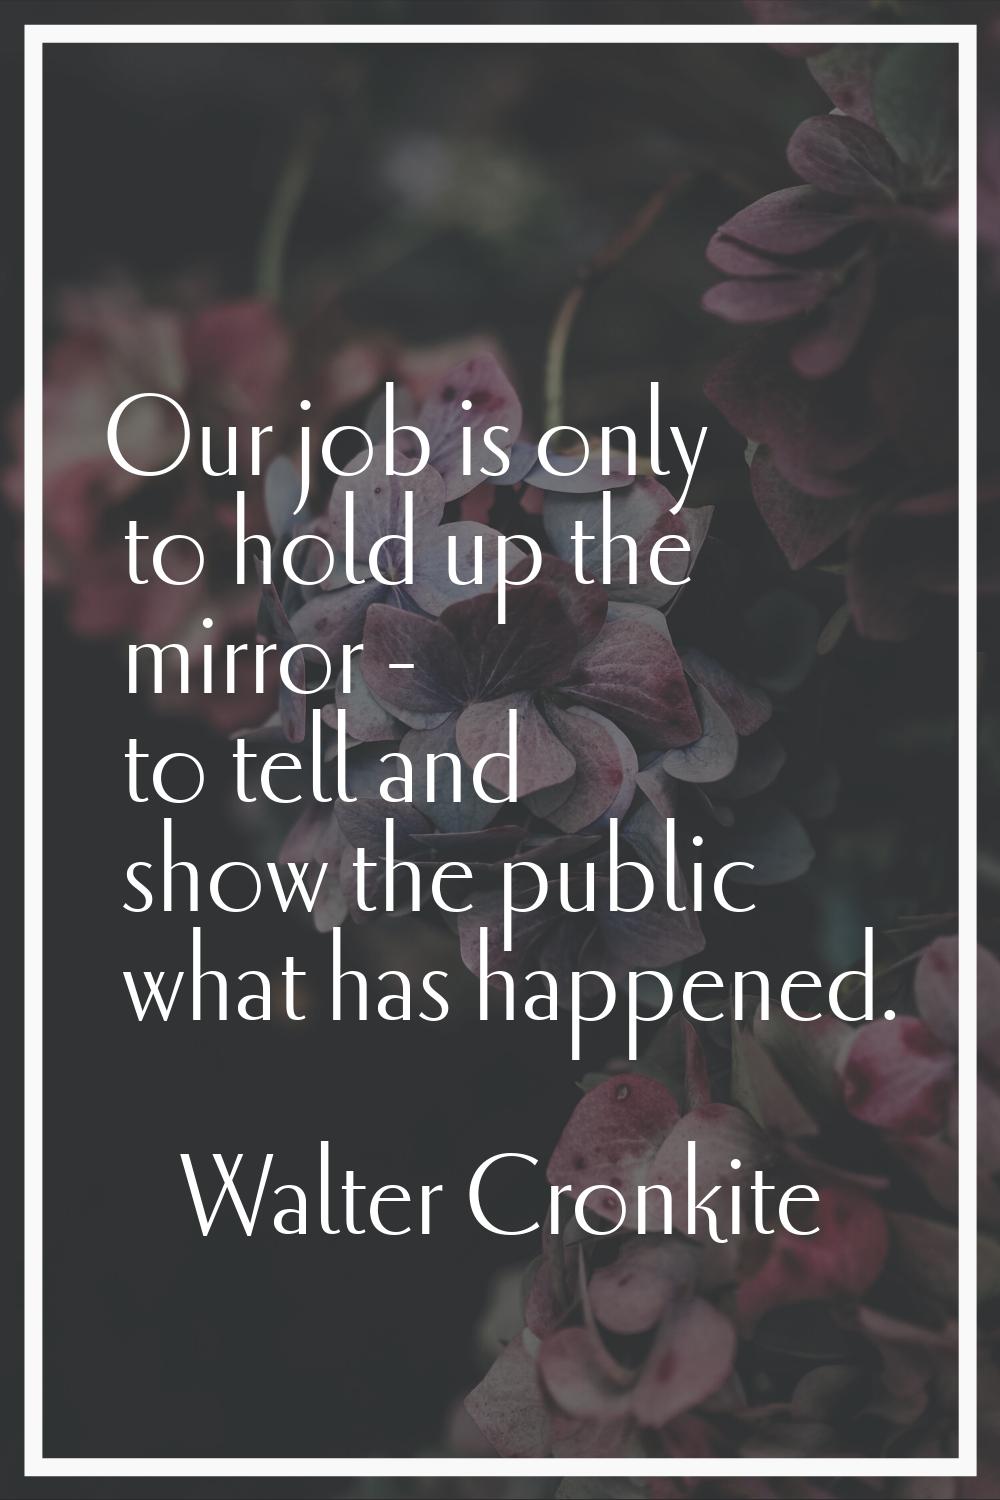 Our job is only to hold up the mirror - to tell and show the public what has happened.